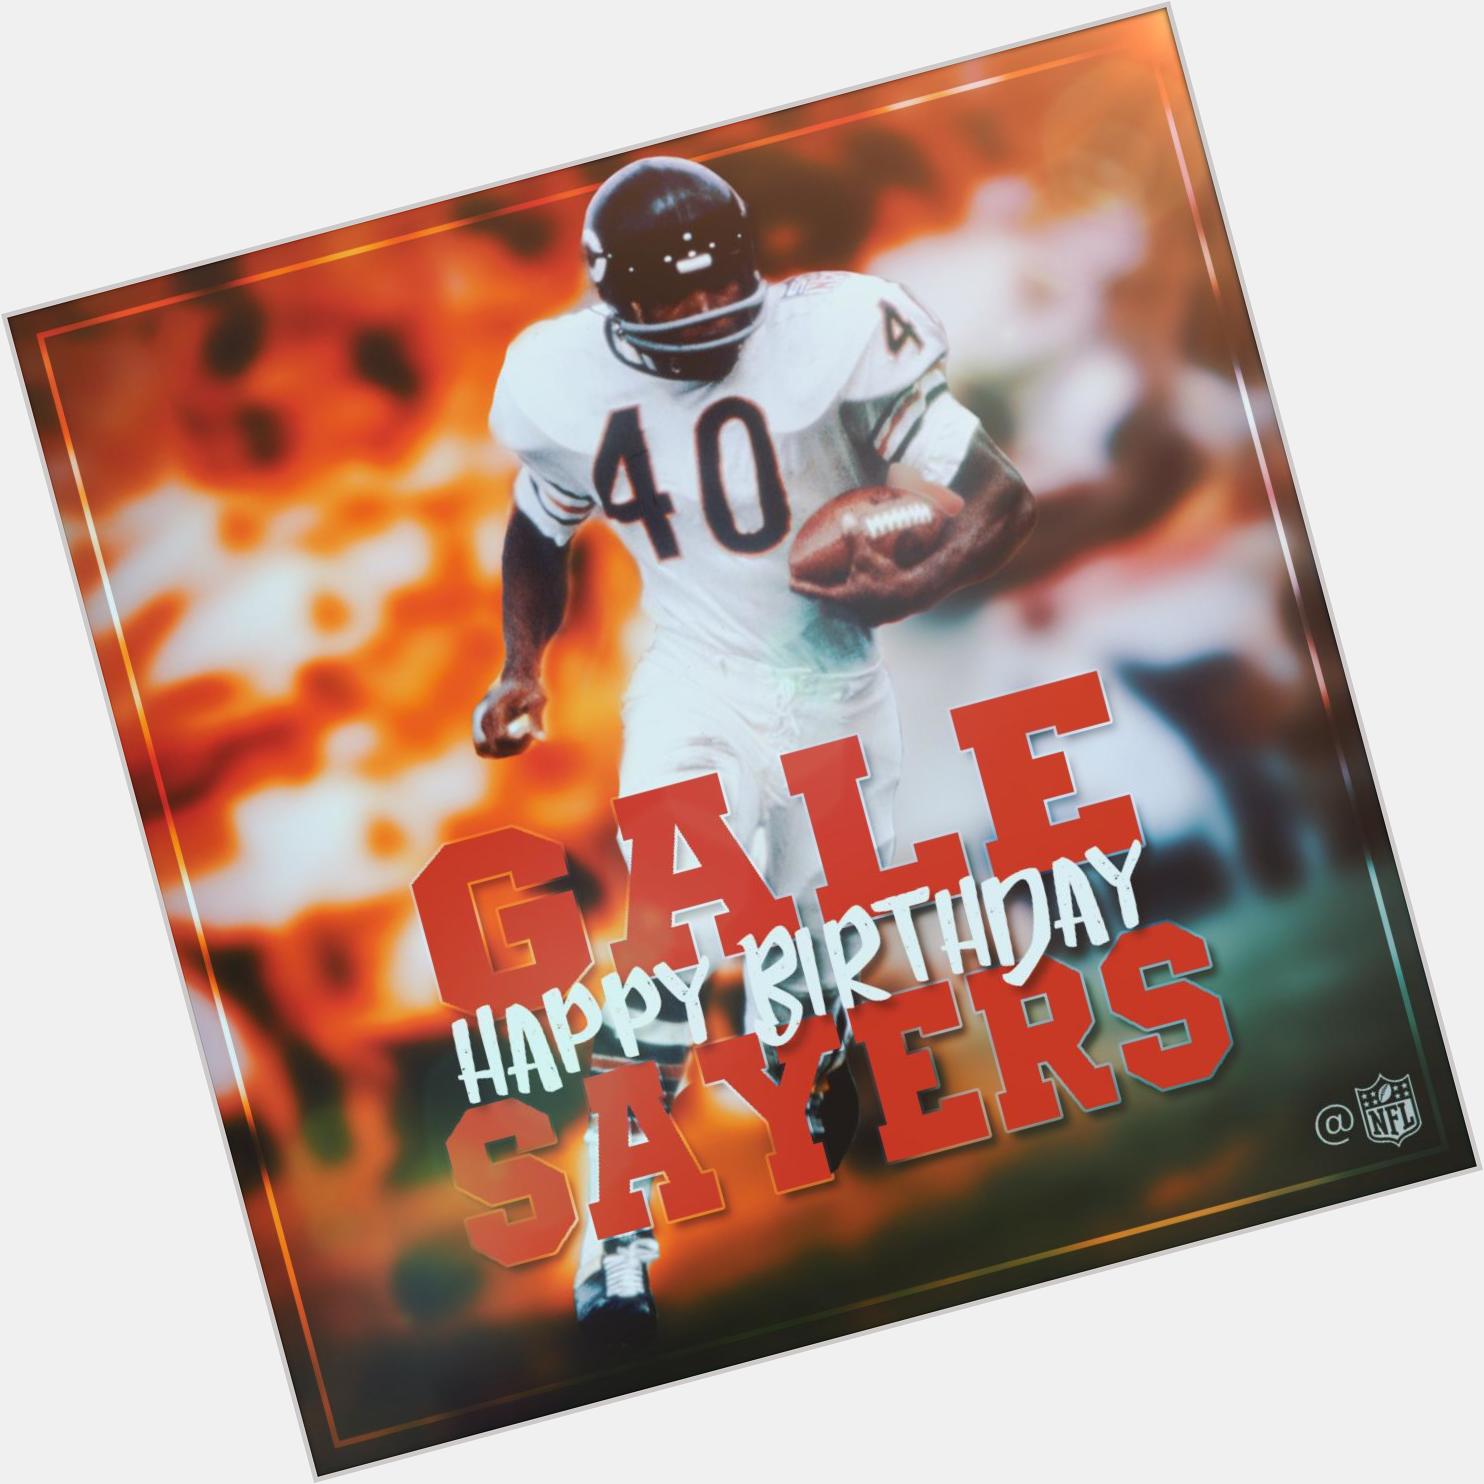 Join us in wishing HAPPY Birthday to and legend Gale Sayers! 